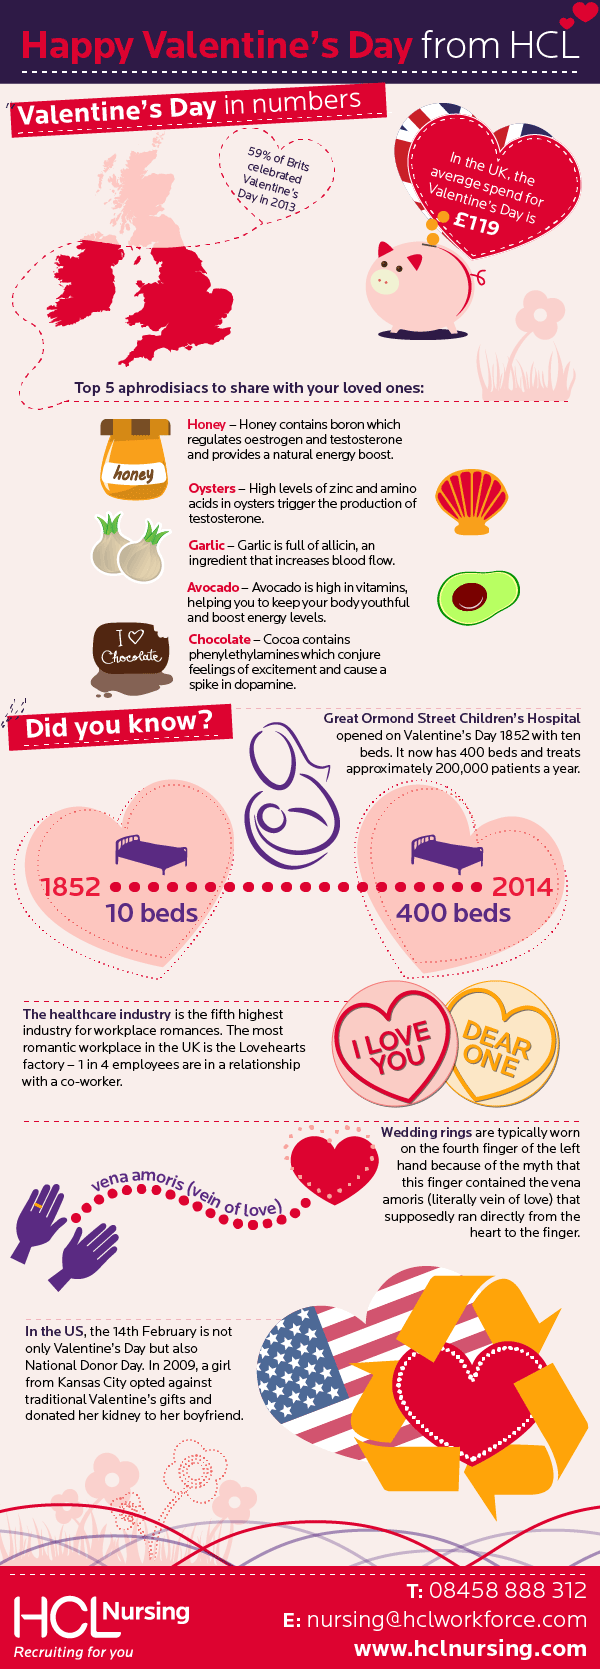 A Valentine’s Day Infographic From HCL Nursing